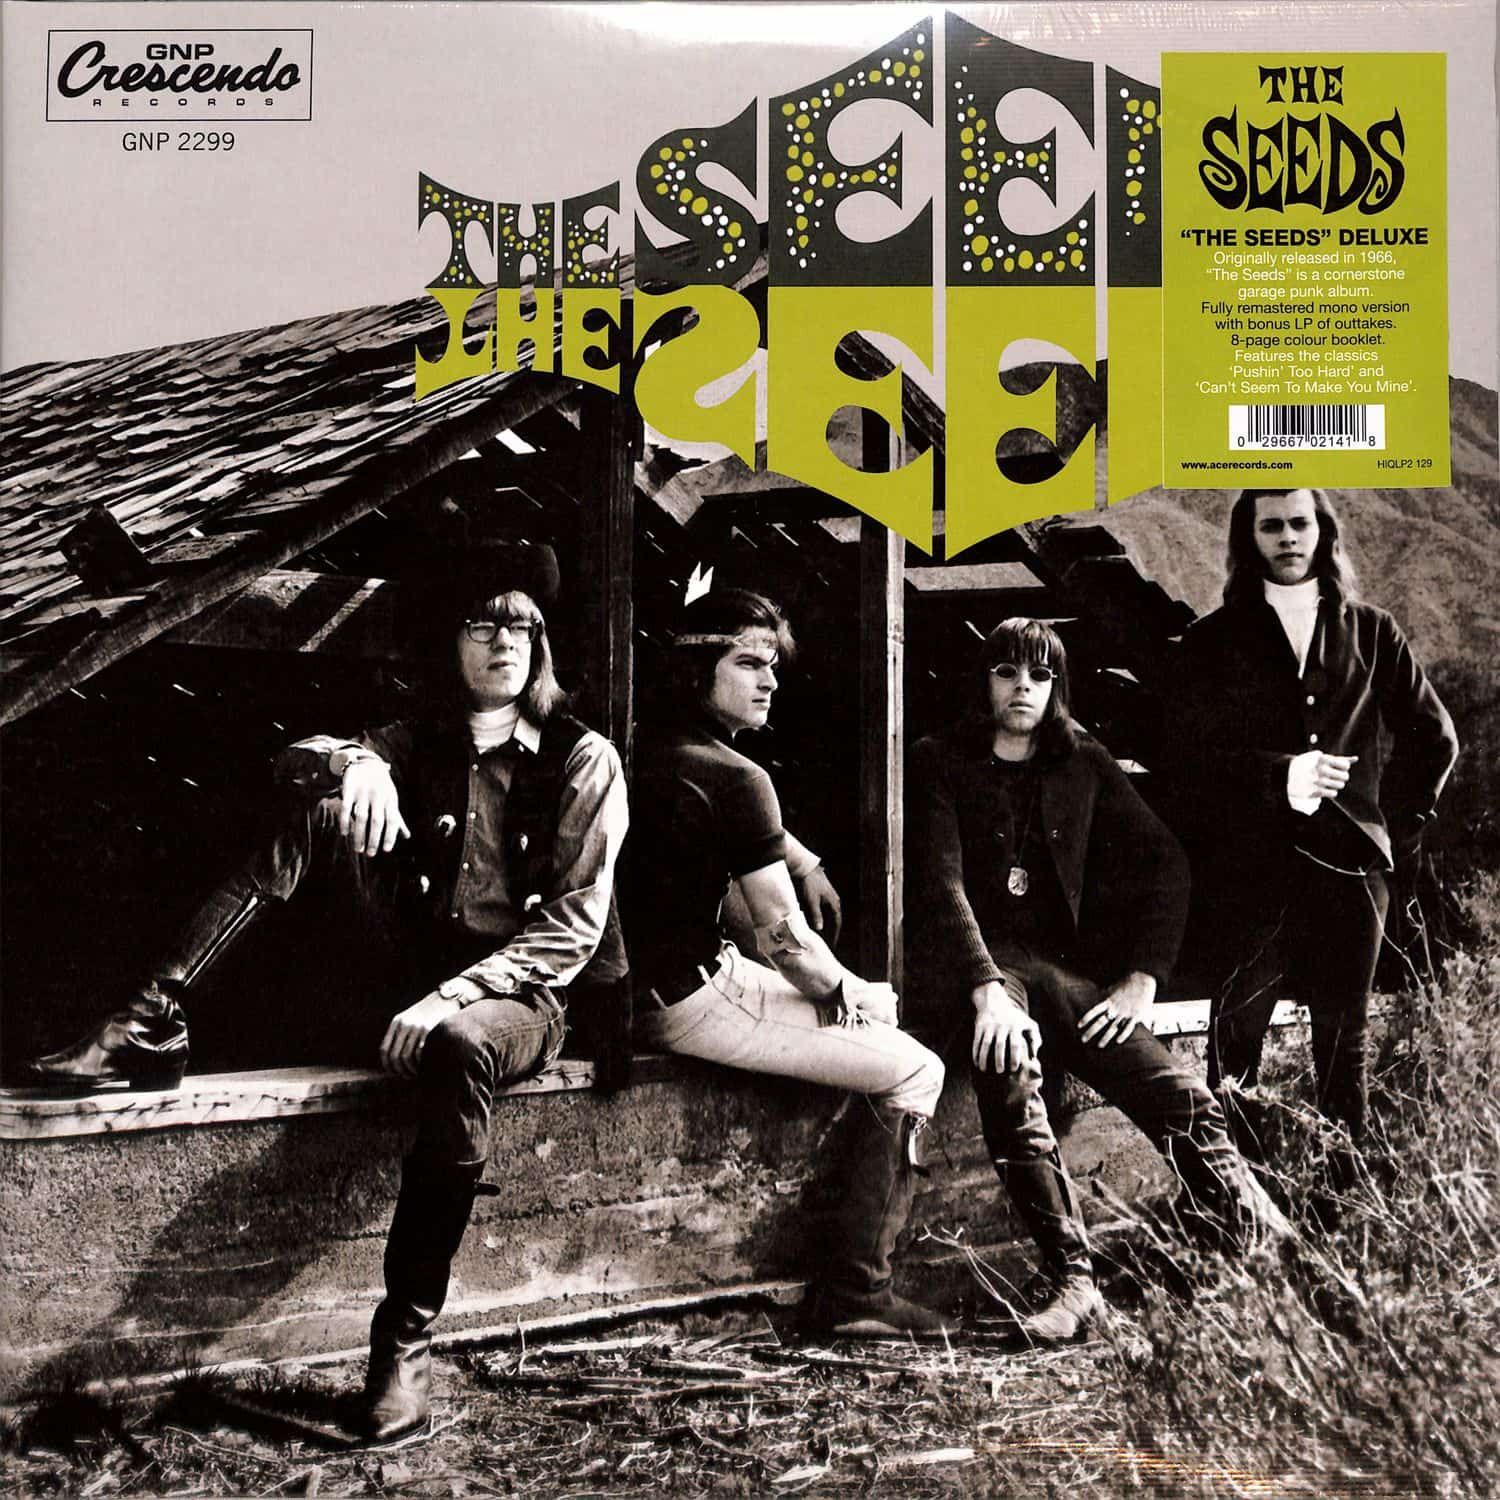 The Seeds - THE SEEDS 